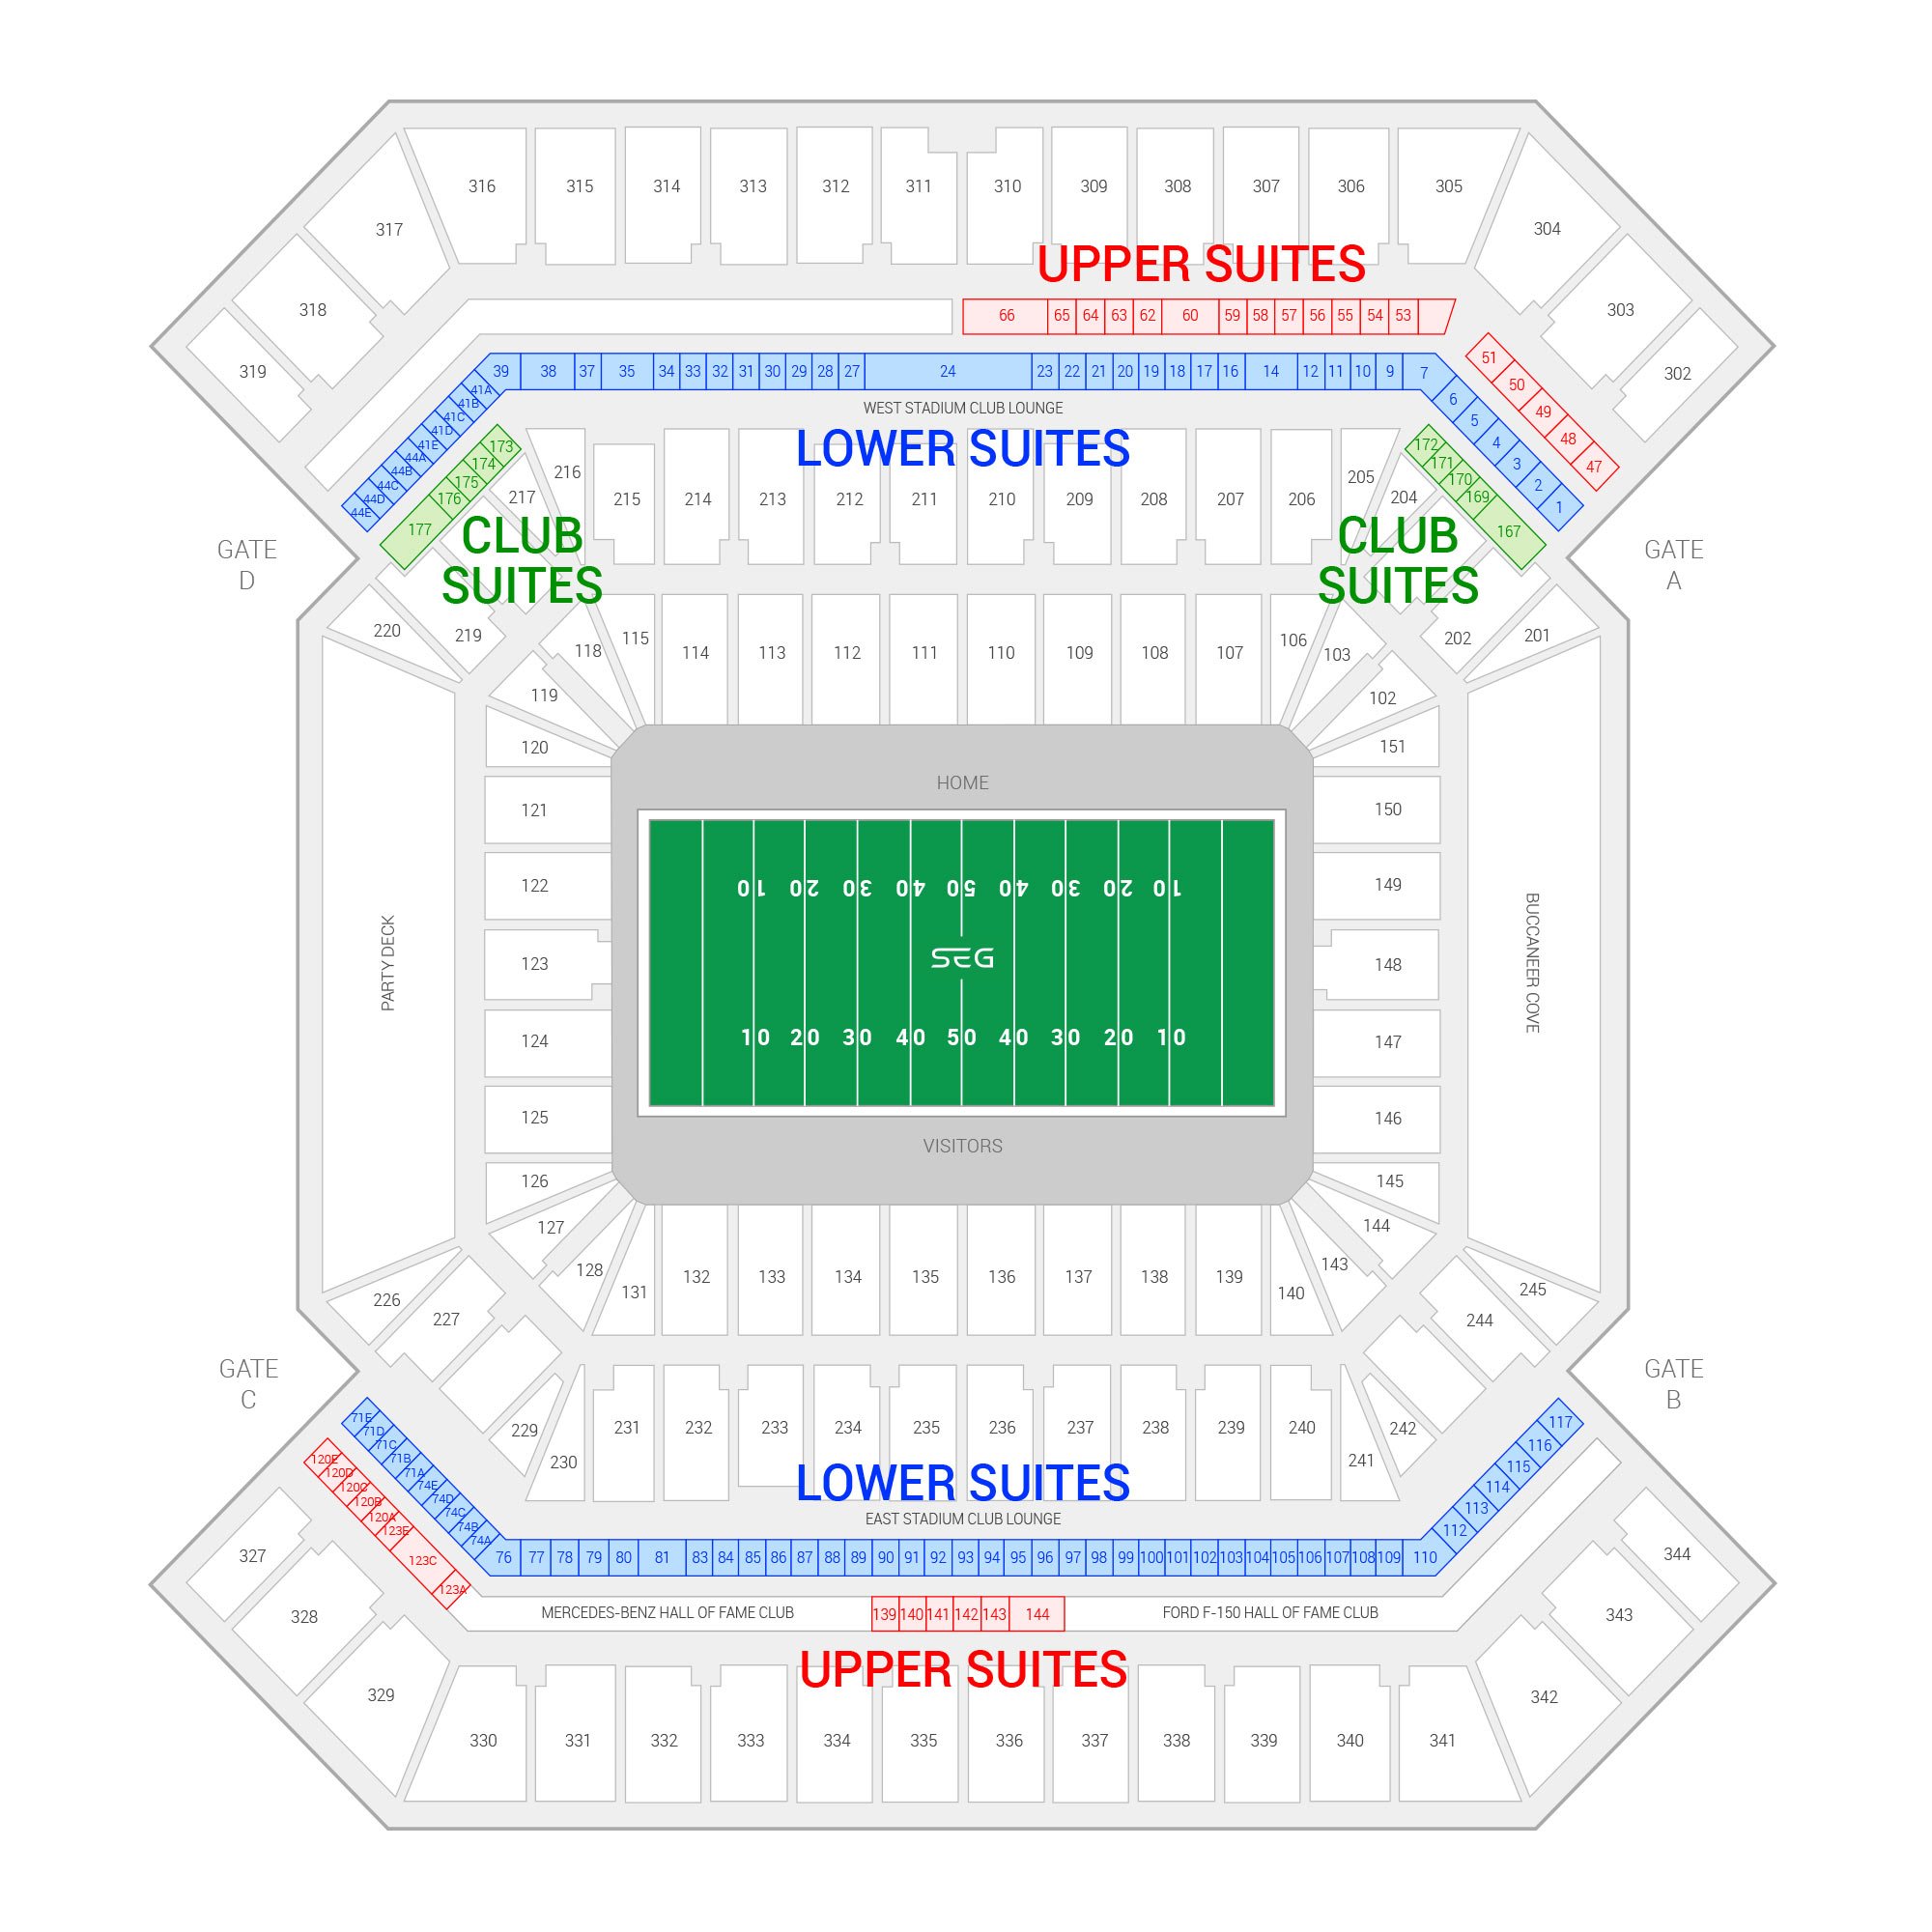 Raymond James Stadium / Super Bowl LV Suite Map and Seating Chart